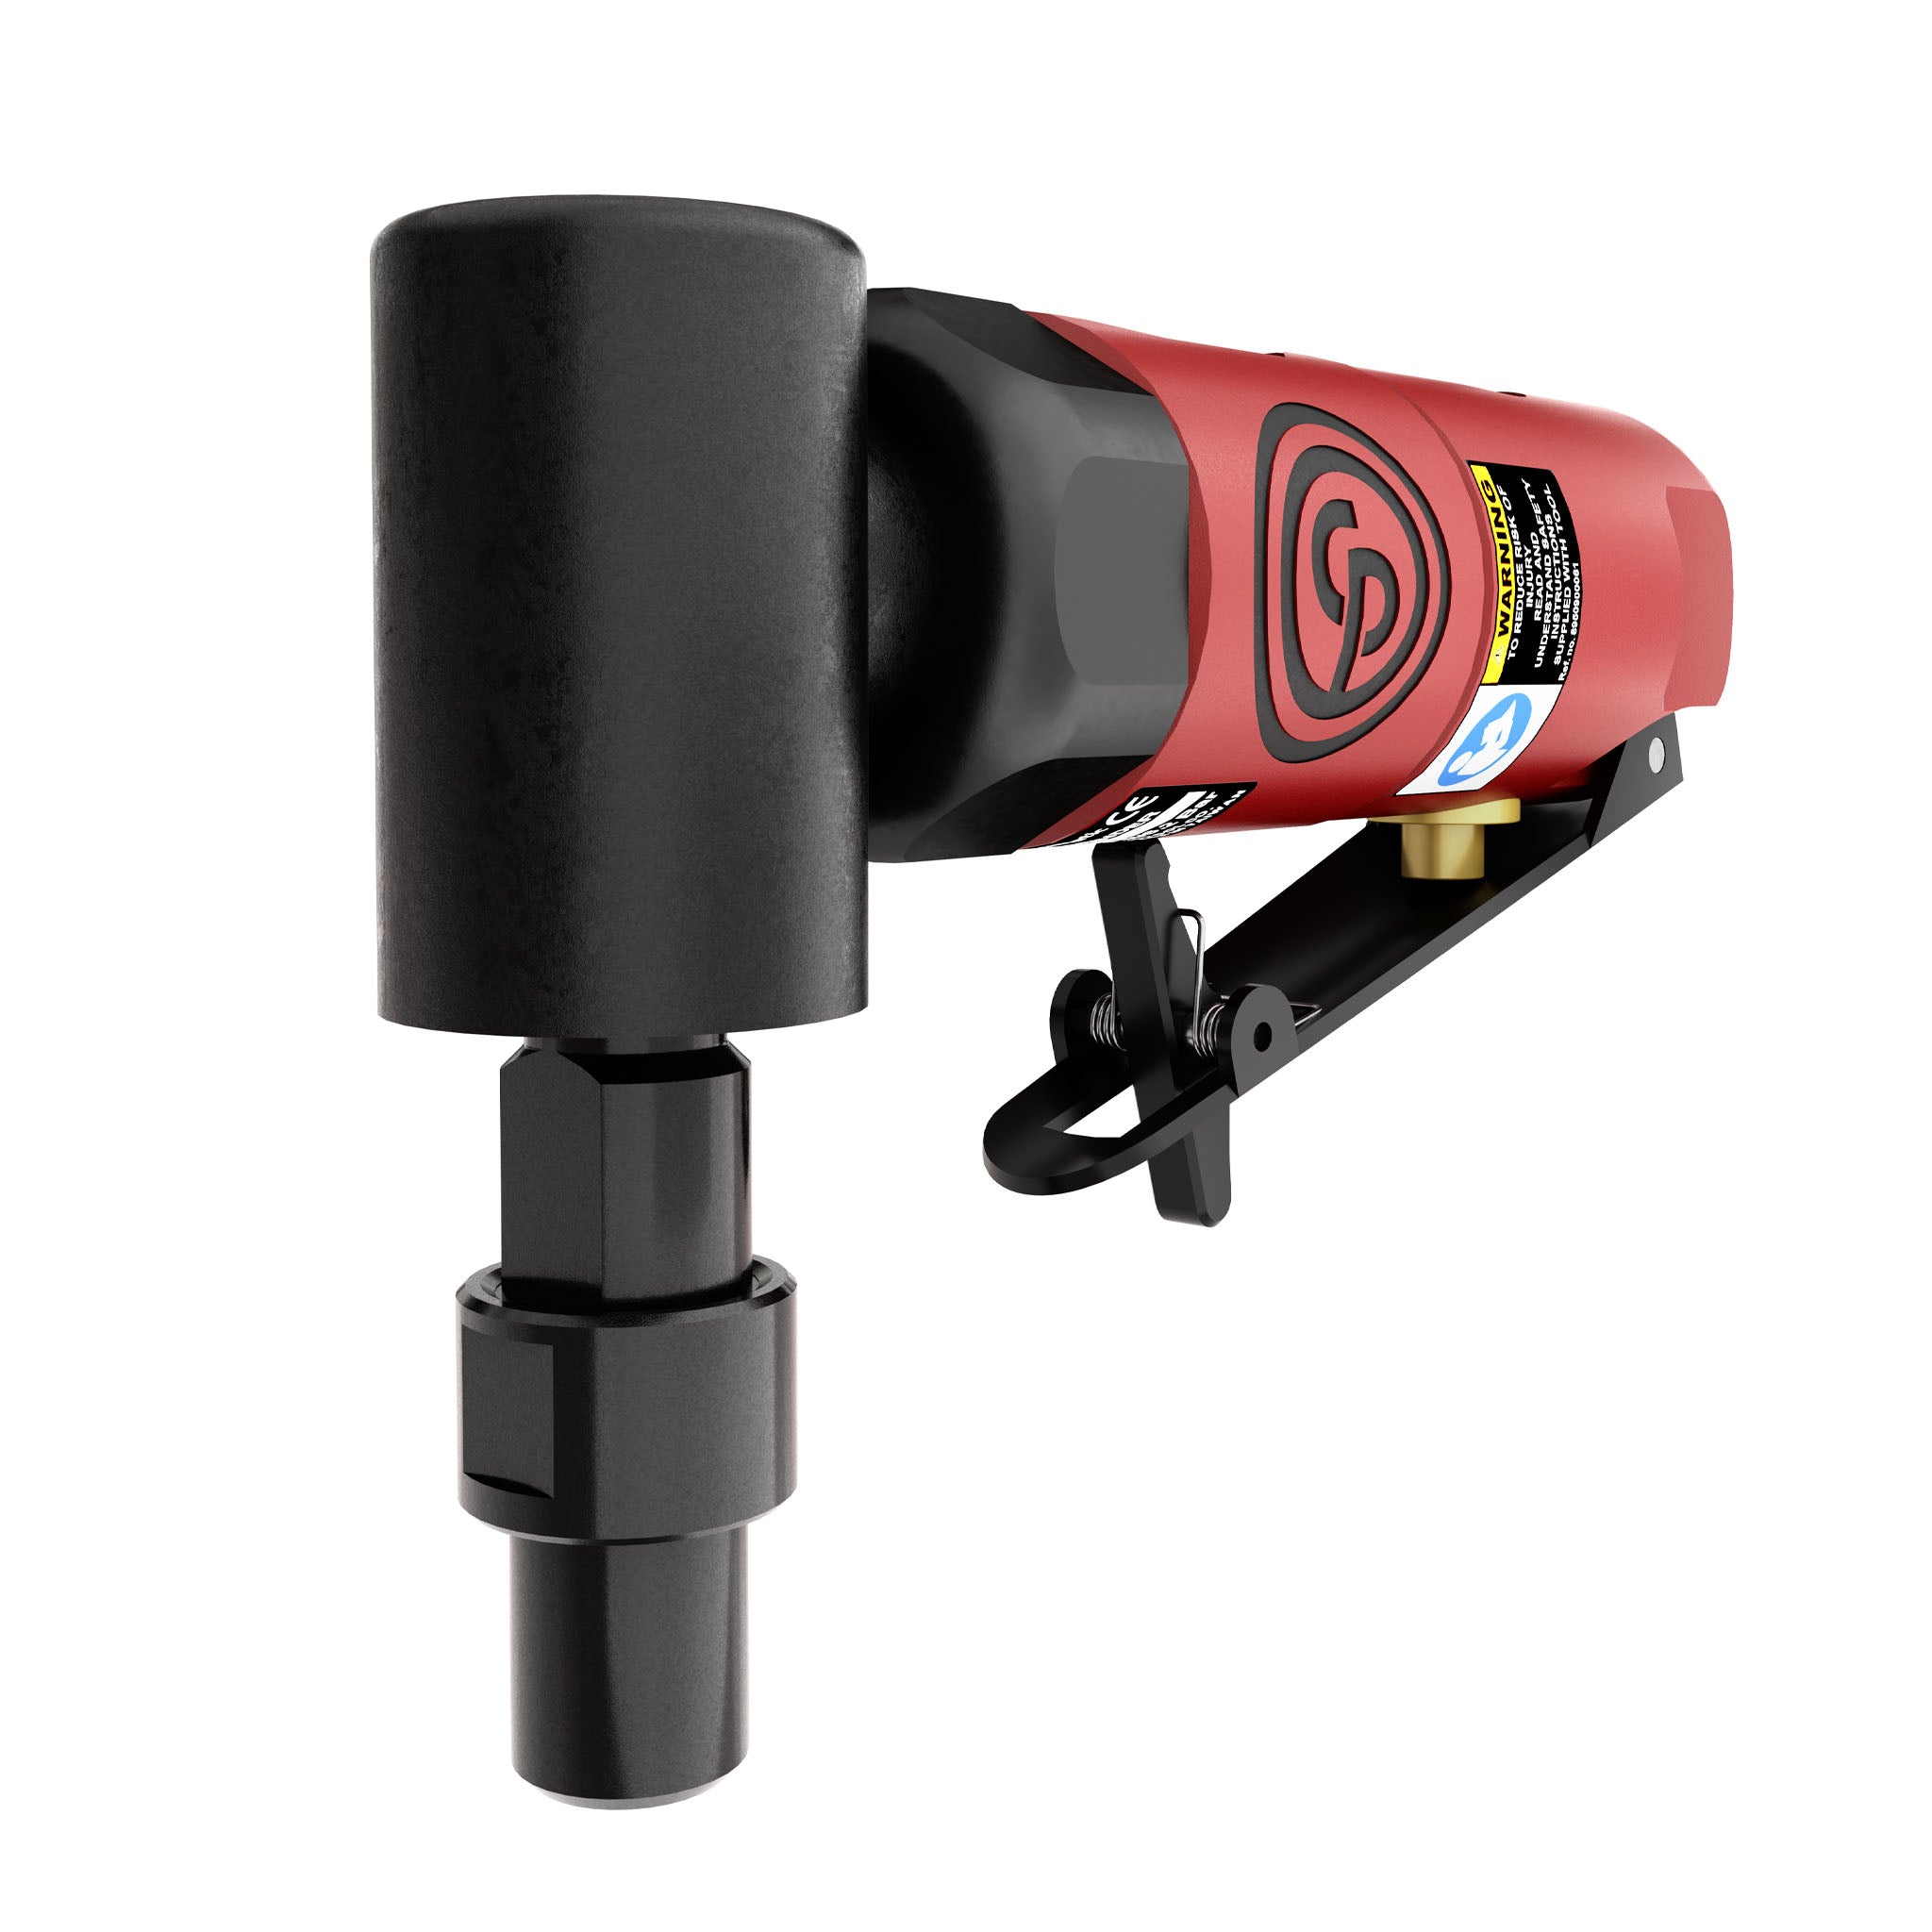 Chicago Pneumatic 1/4 Mini 90 Degree Angle Die Grinder - CP-875